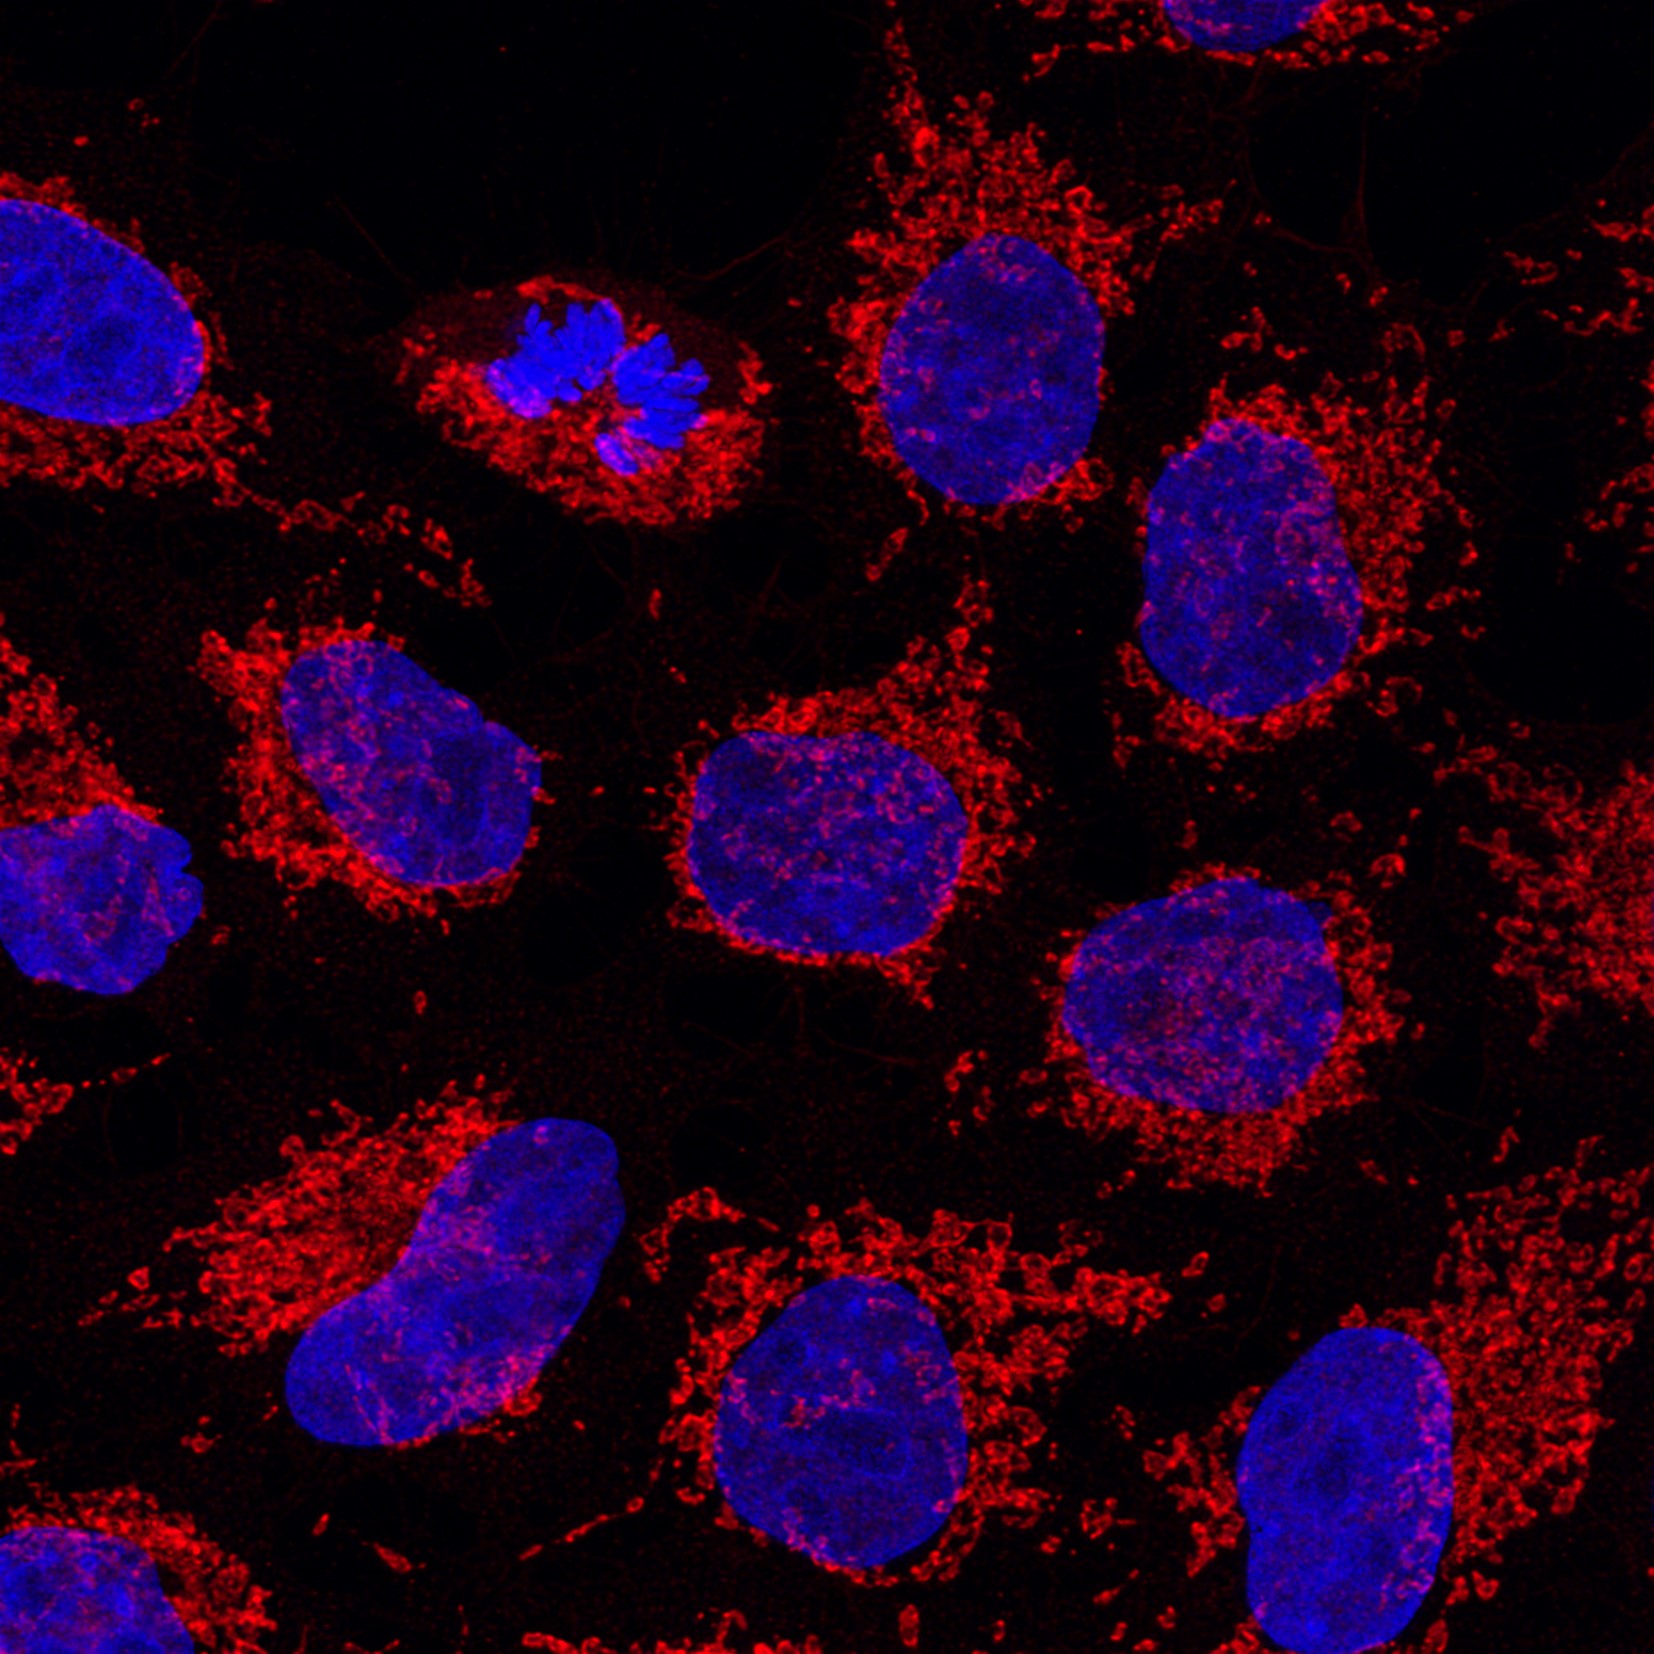 Immunofluorescence of Hela cells: Hela cells were fixed with 4% PFA and stained with Rabbit anti-TOM70 polyclonal antibody (14528-1-AP, 1:200) Multi-rAb CoraLite® Plus 555 conjugated Goat Anti-Rabbit Recombinant Secondary Antibody (H+L) (RGAR003, 1:600) was used for detection. Nucleus was stained with DAPI(blue). The experiment was performed in Chromotek’s lab and image was recorded at the Core Facility Bioimaging at the Biomedical Center, LMU Munich.